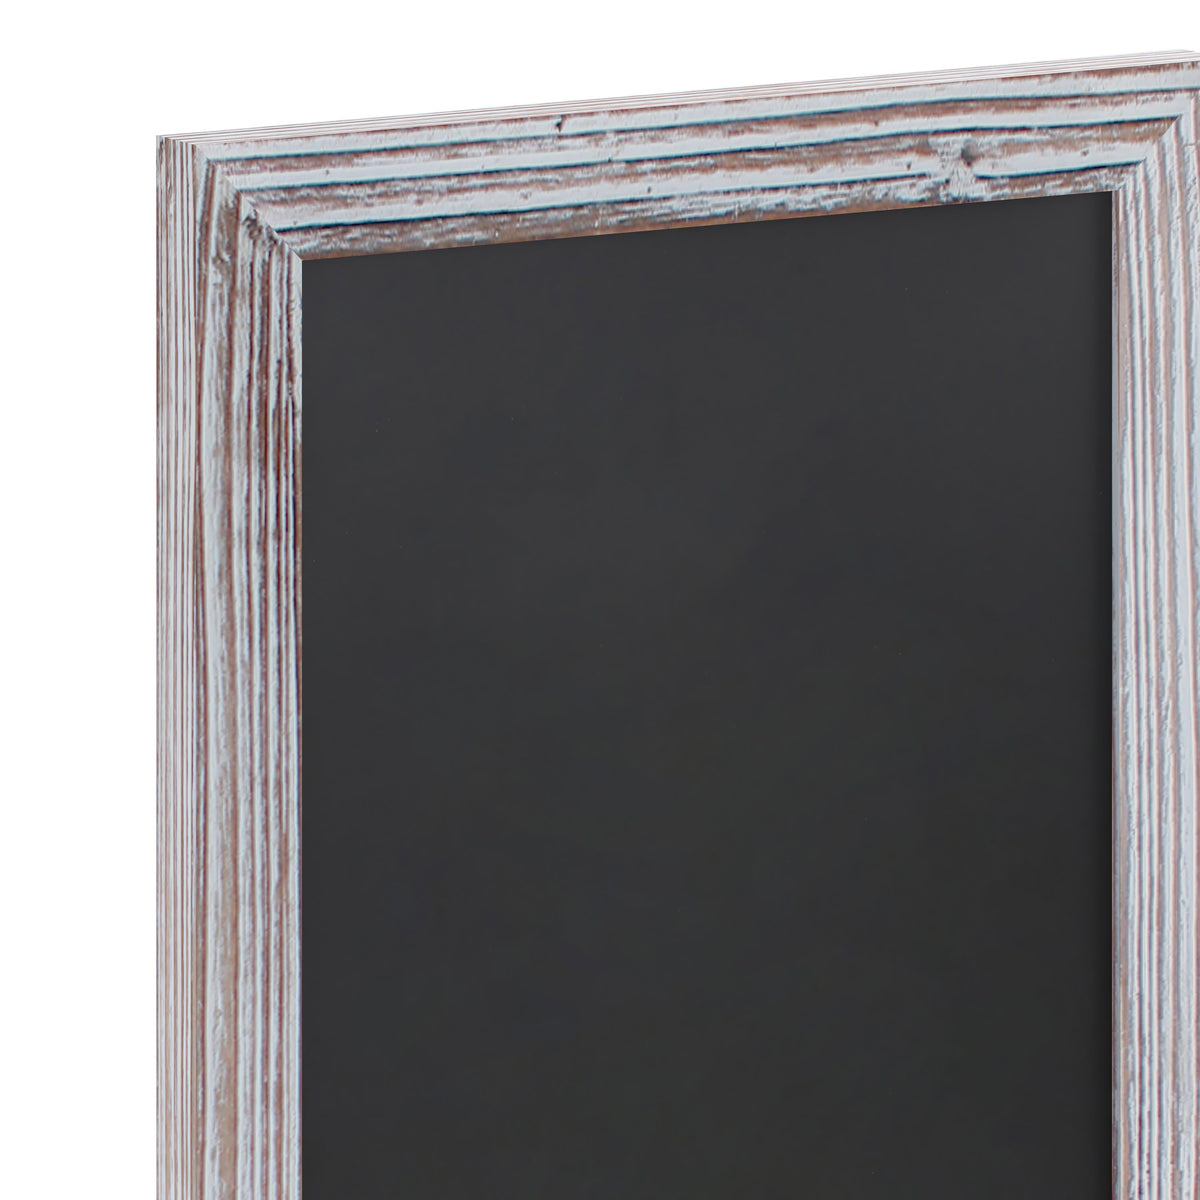 White Wash |#| Set of 10 Wall Mounted Magnetic Chalkboards in Whitewashed - 9.5inch x 14inch